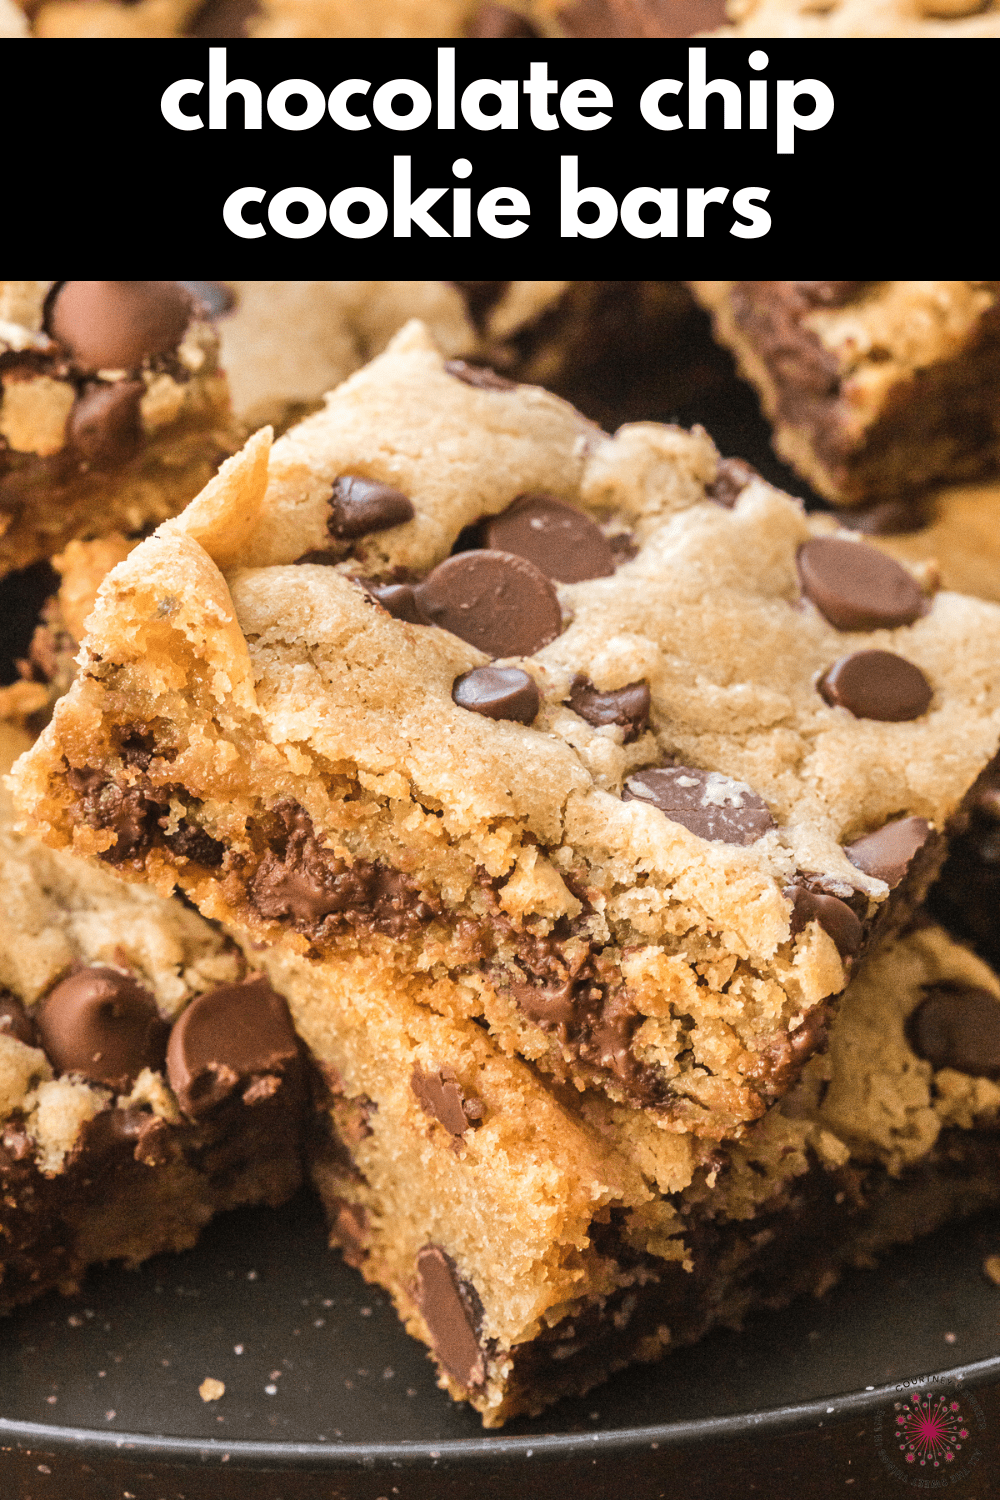 showing inside of chocolate chip cookie bar with text on image for pinterest.